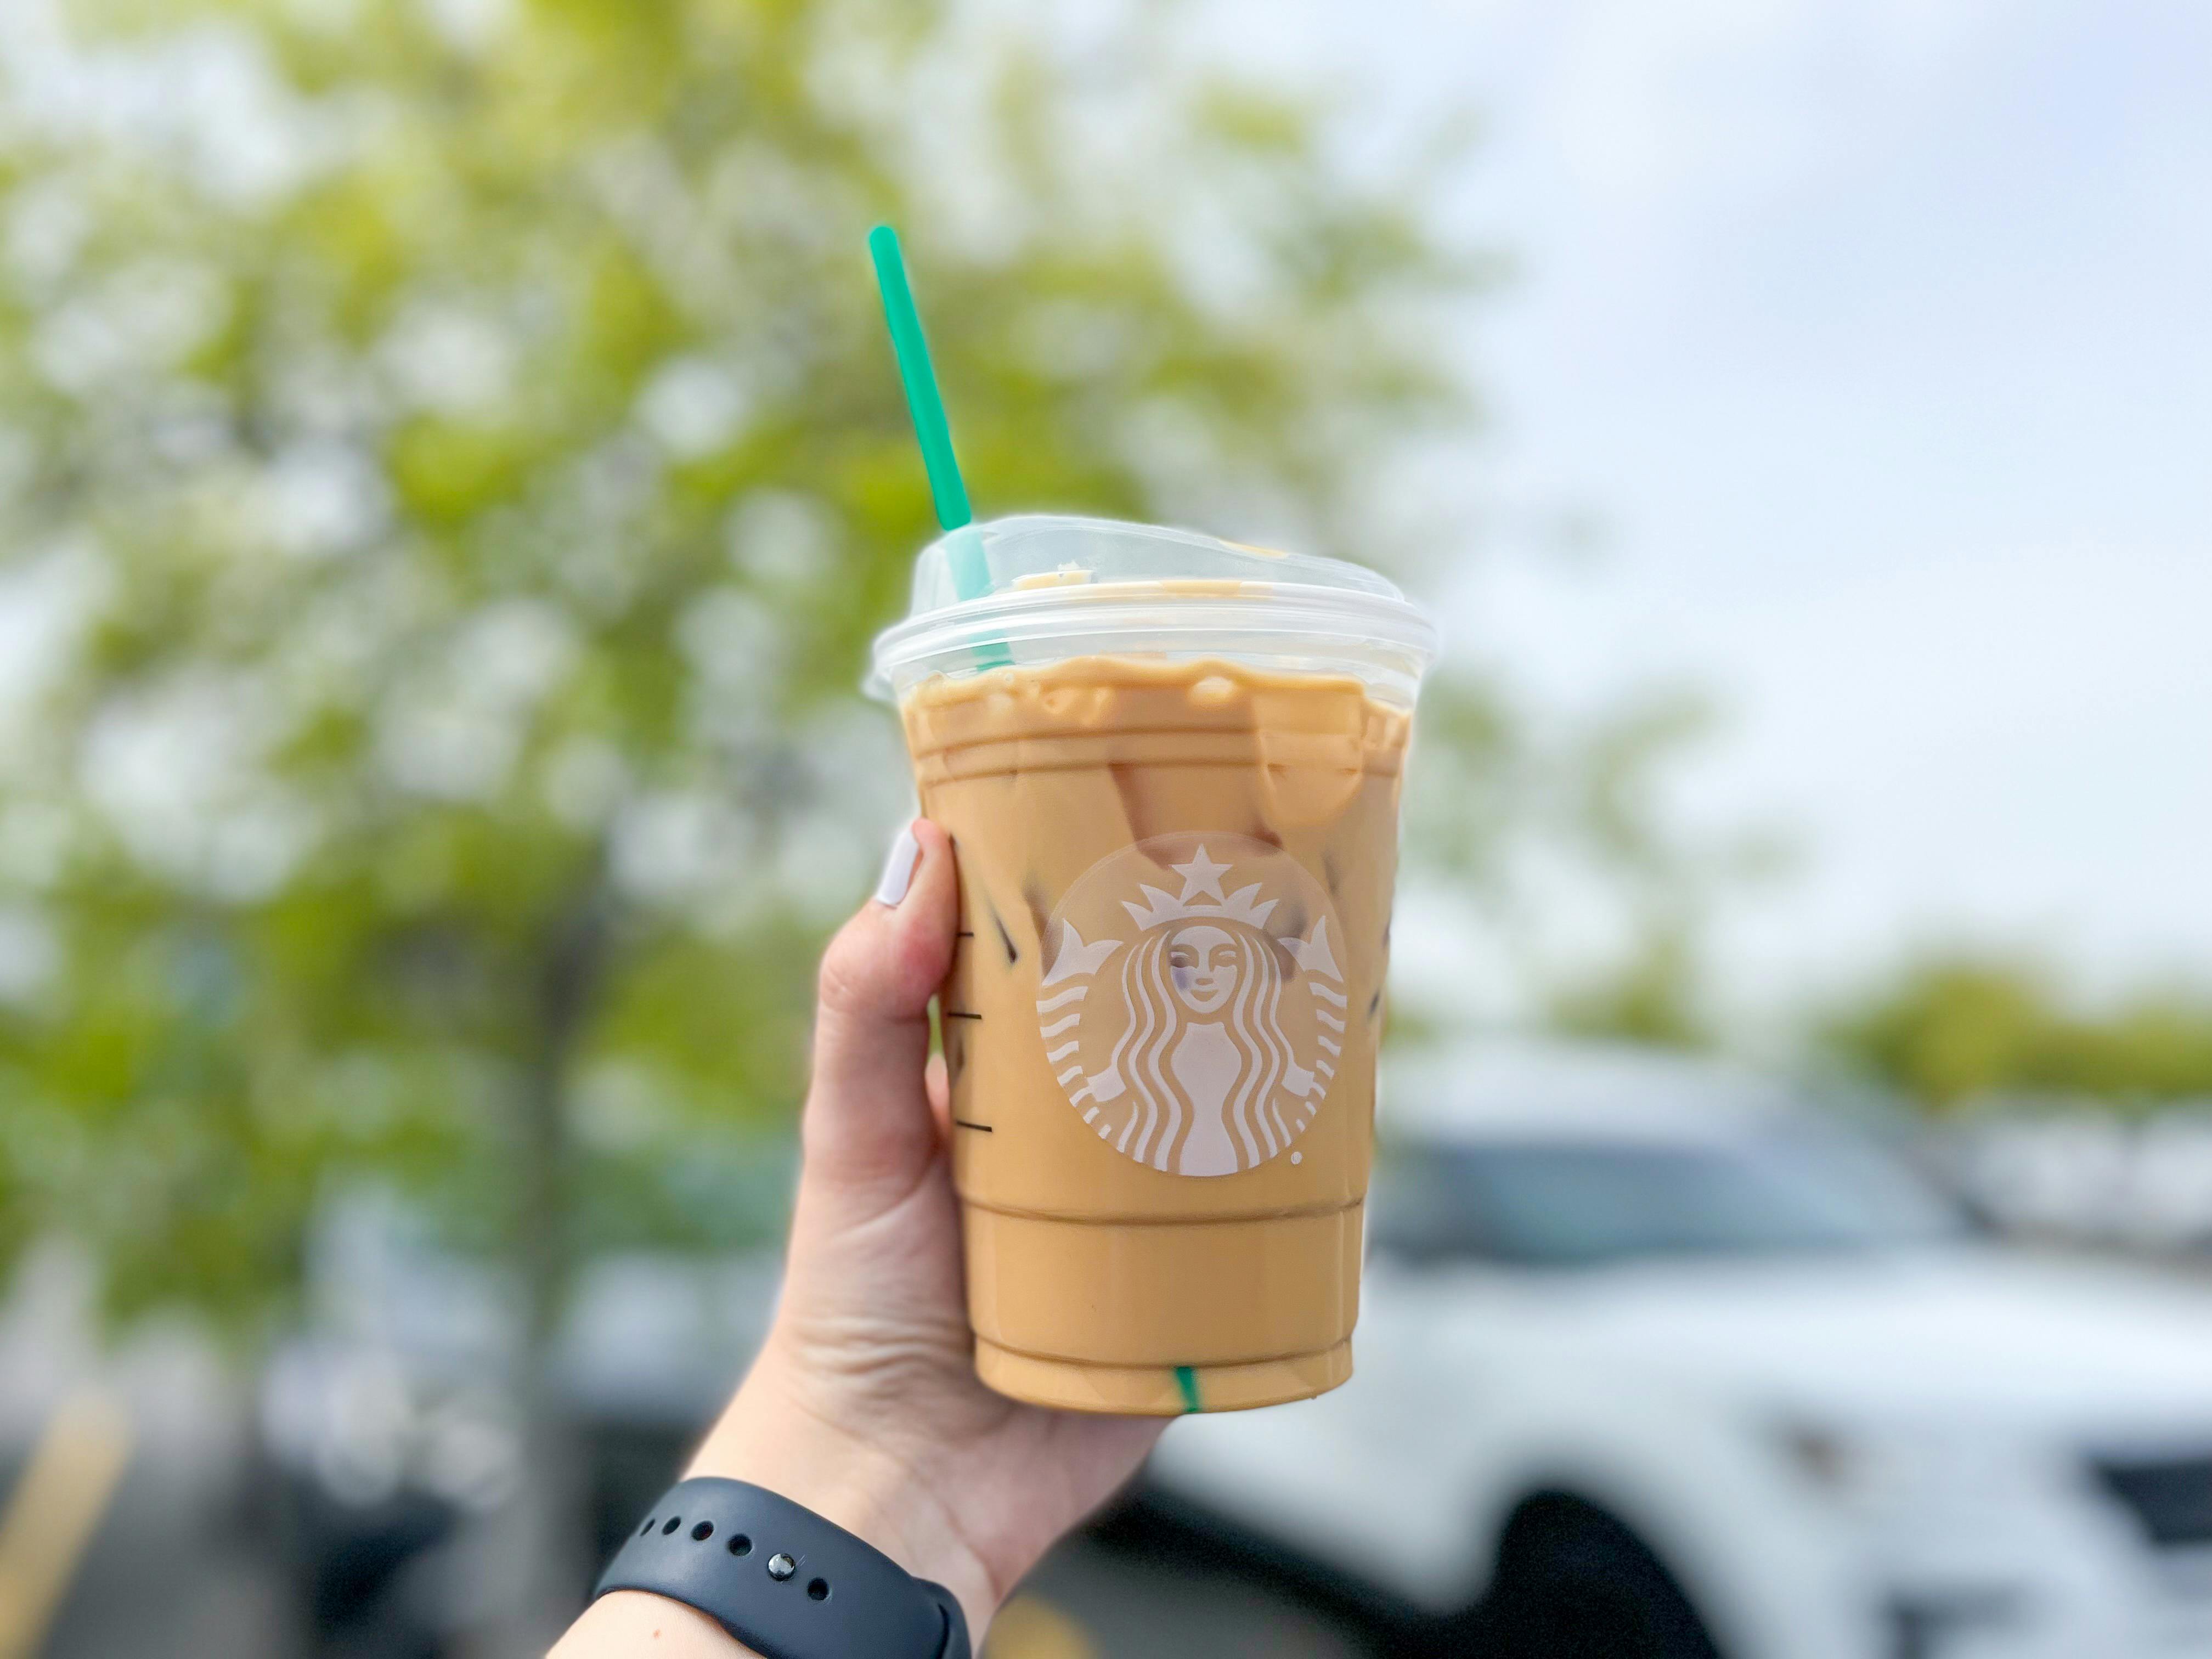 A person's hand holding up an iced Starbucks coffee while outside.